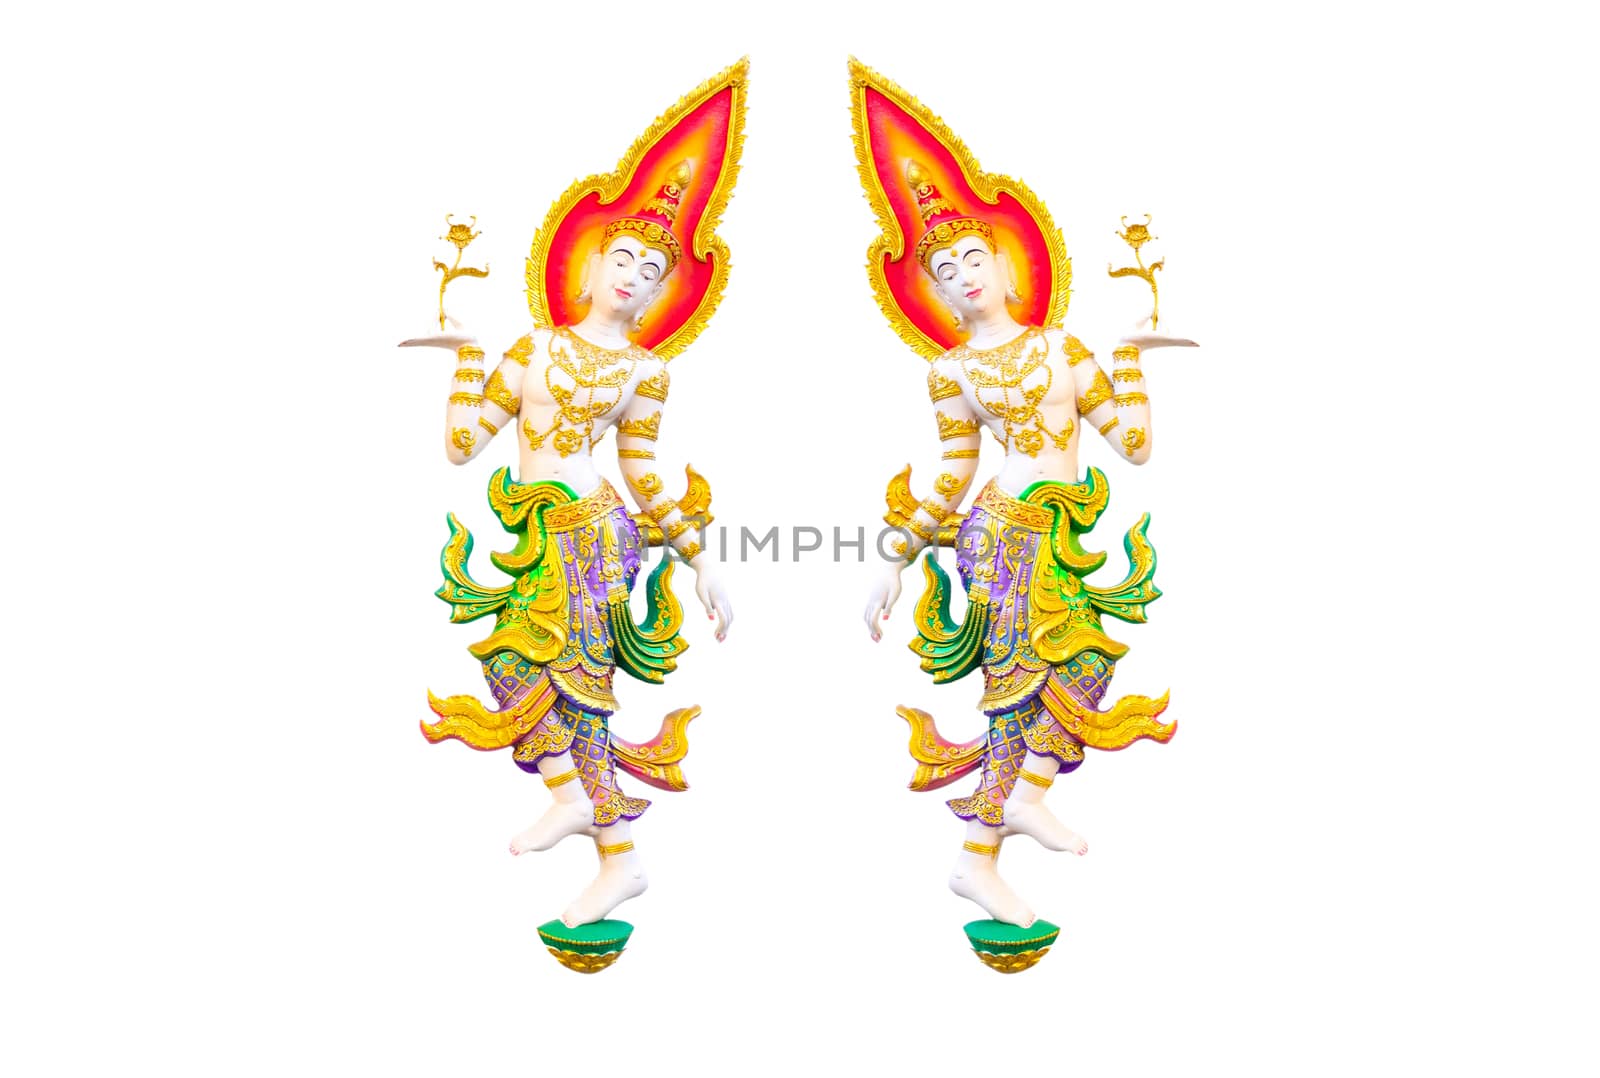 Beautiful painted stucco of an angle, classical Thai style, on white background. Thai temples are often decorated with stucco arts with religious motifs.